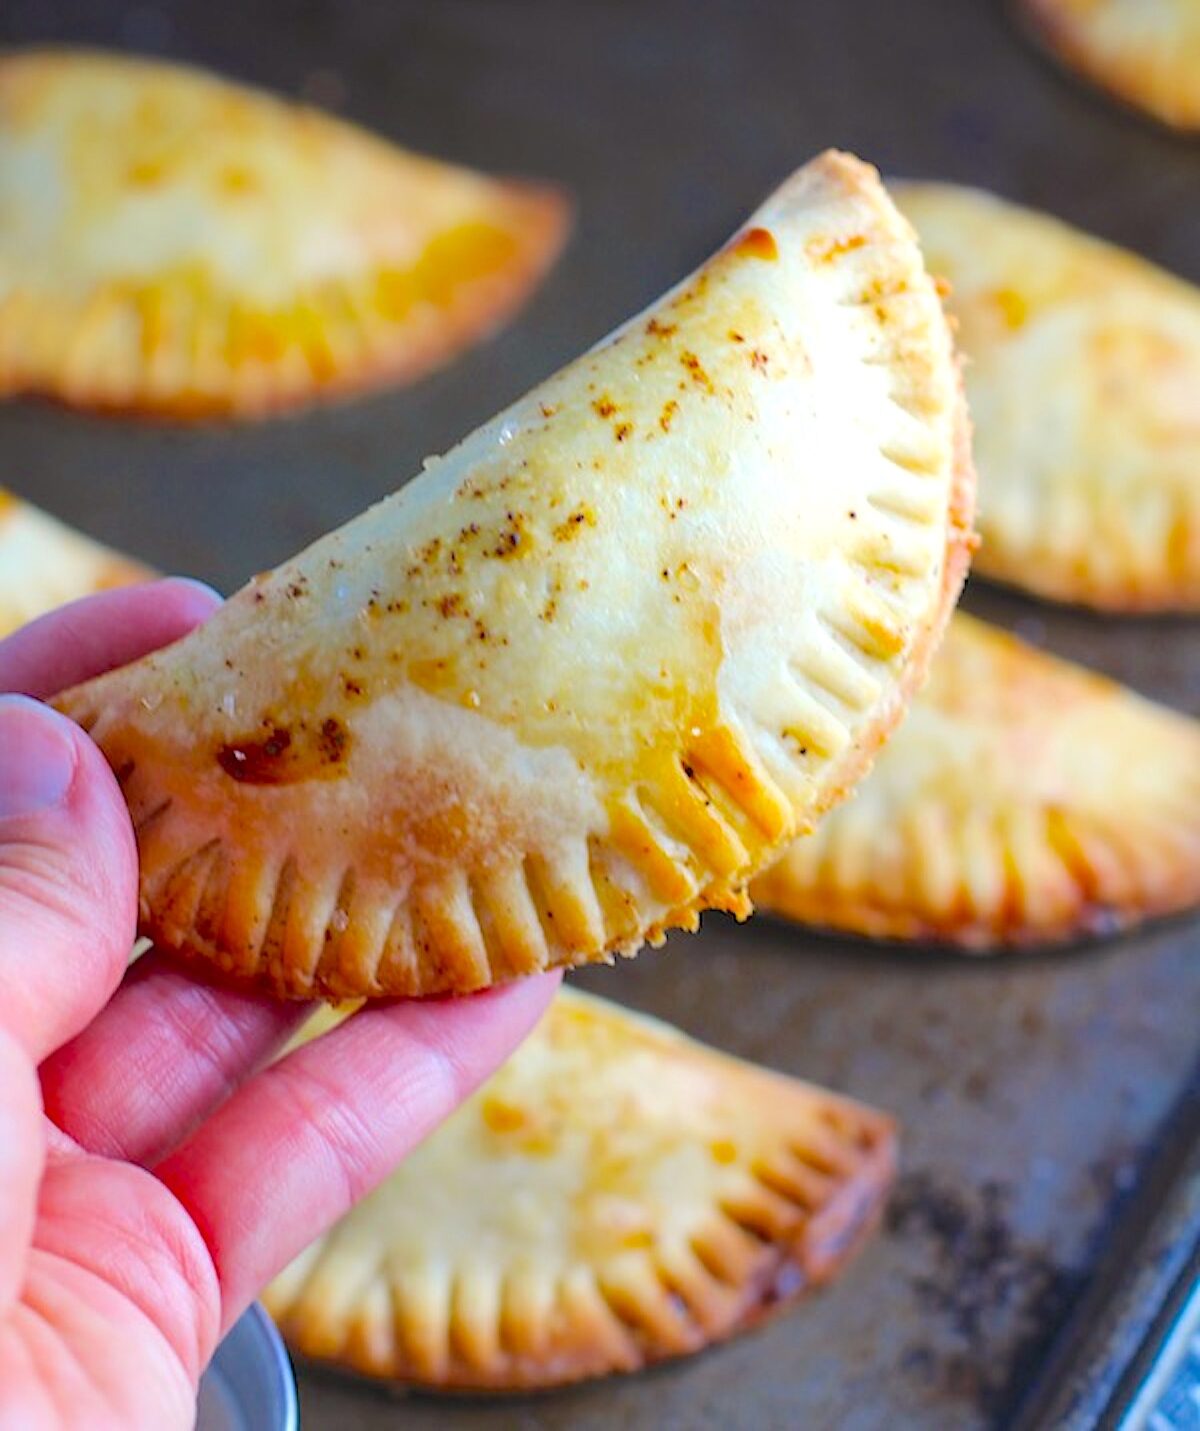 Hand holding one of the baked spiced beef empanadas over the pan of the other empanadas.